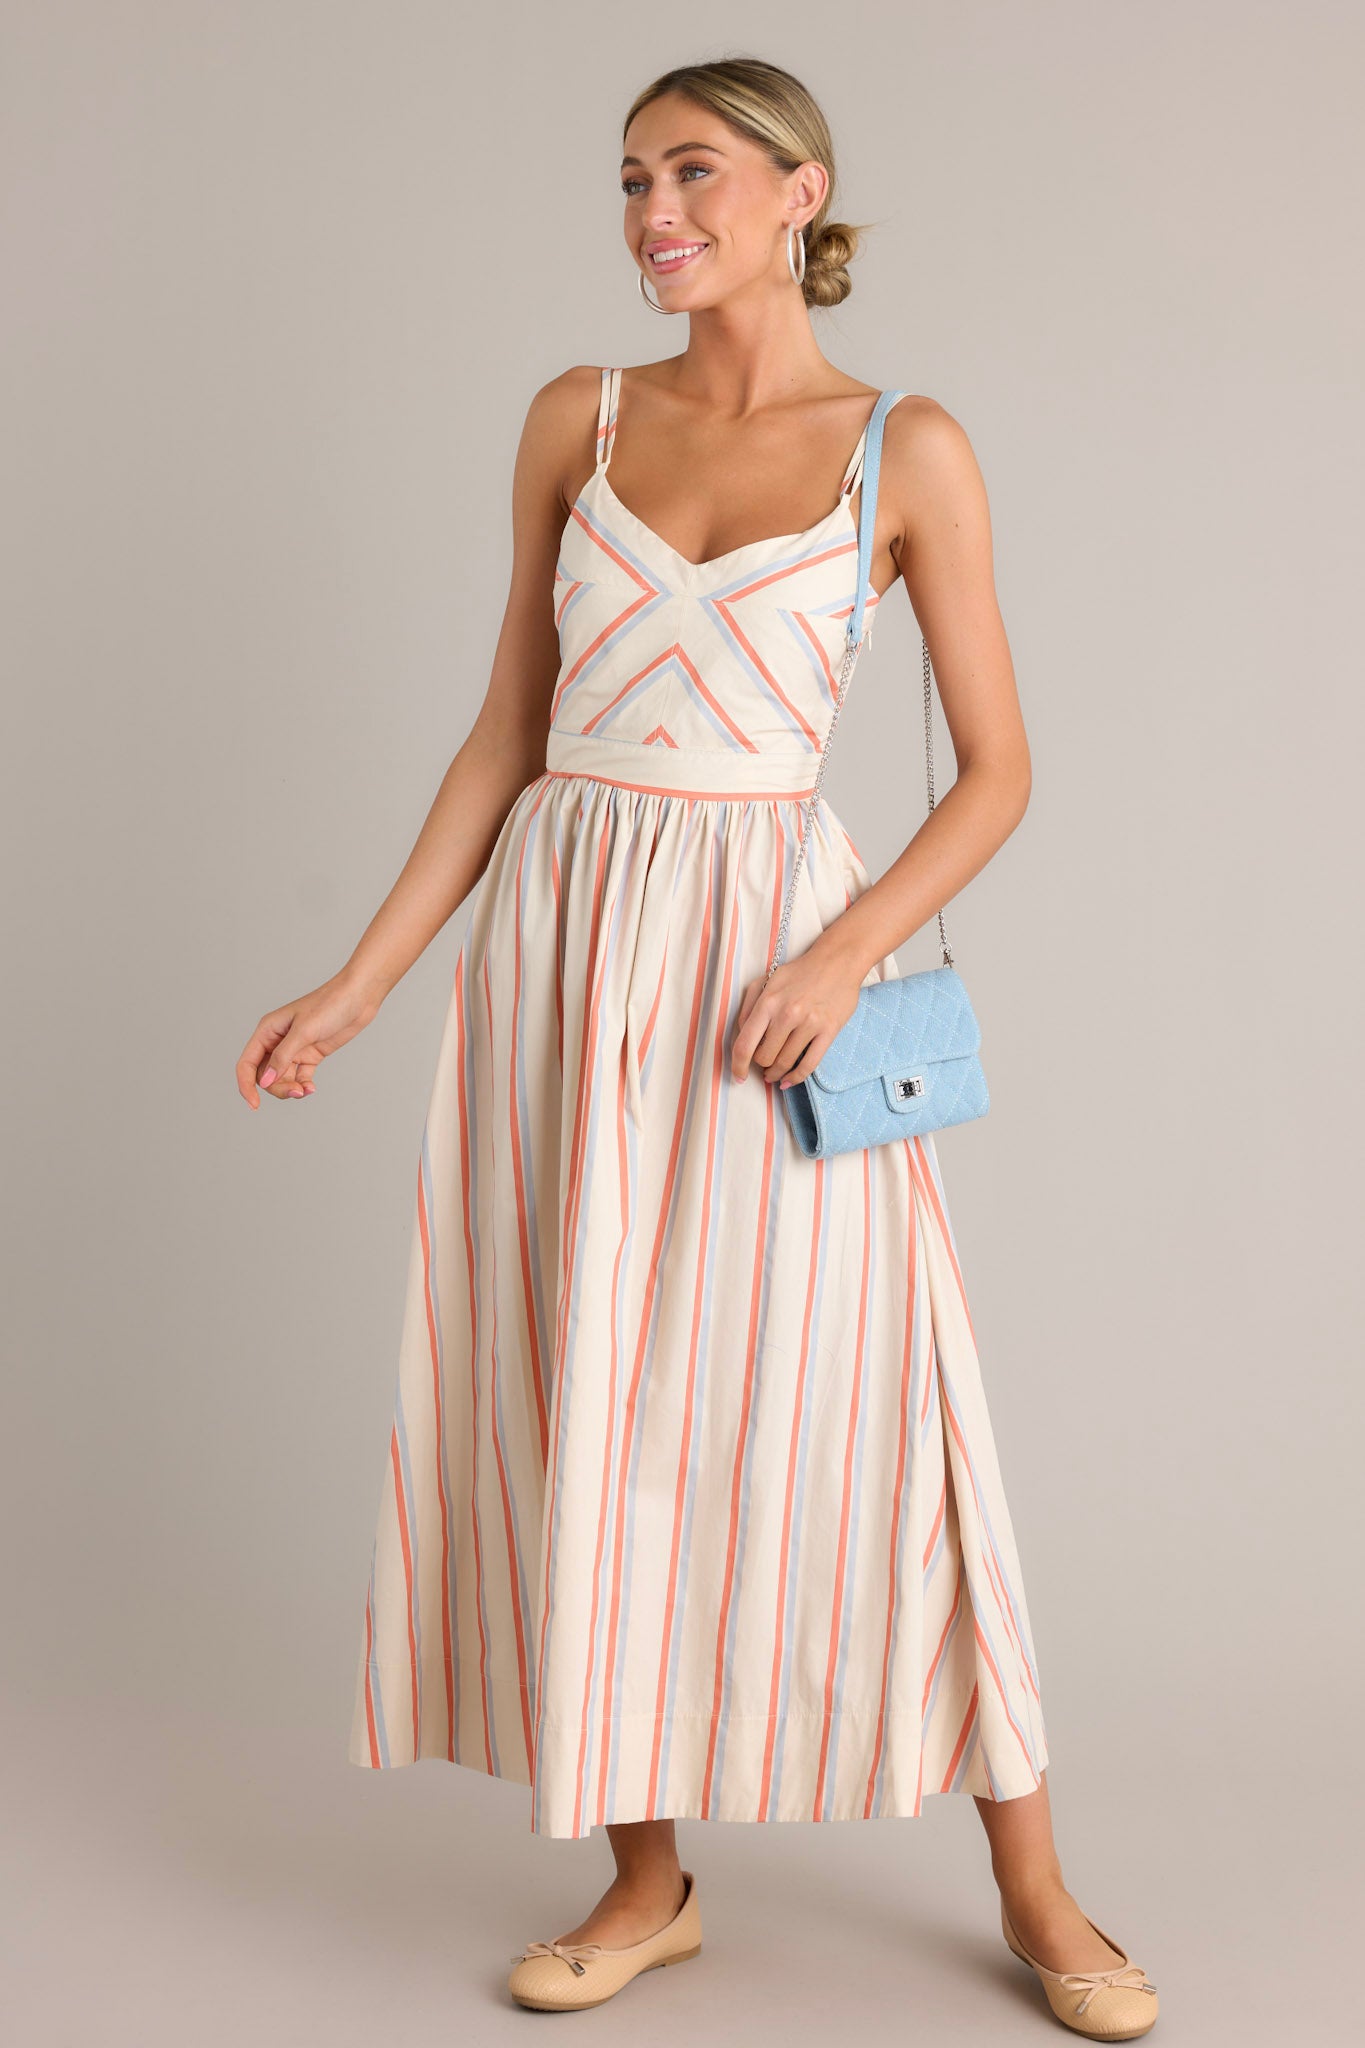 Full length view of a multi stripe dress with a v-neckline, thin adjustable double straps, a smocked back insert, a discrete side zipper, a flowing silhouette, and a thick hemline